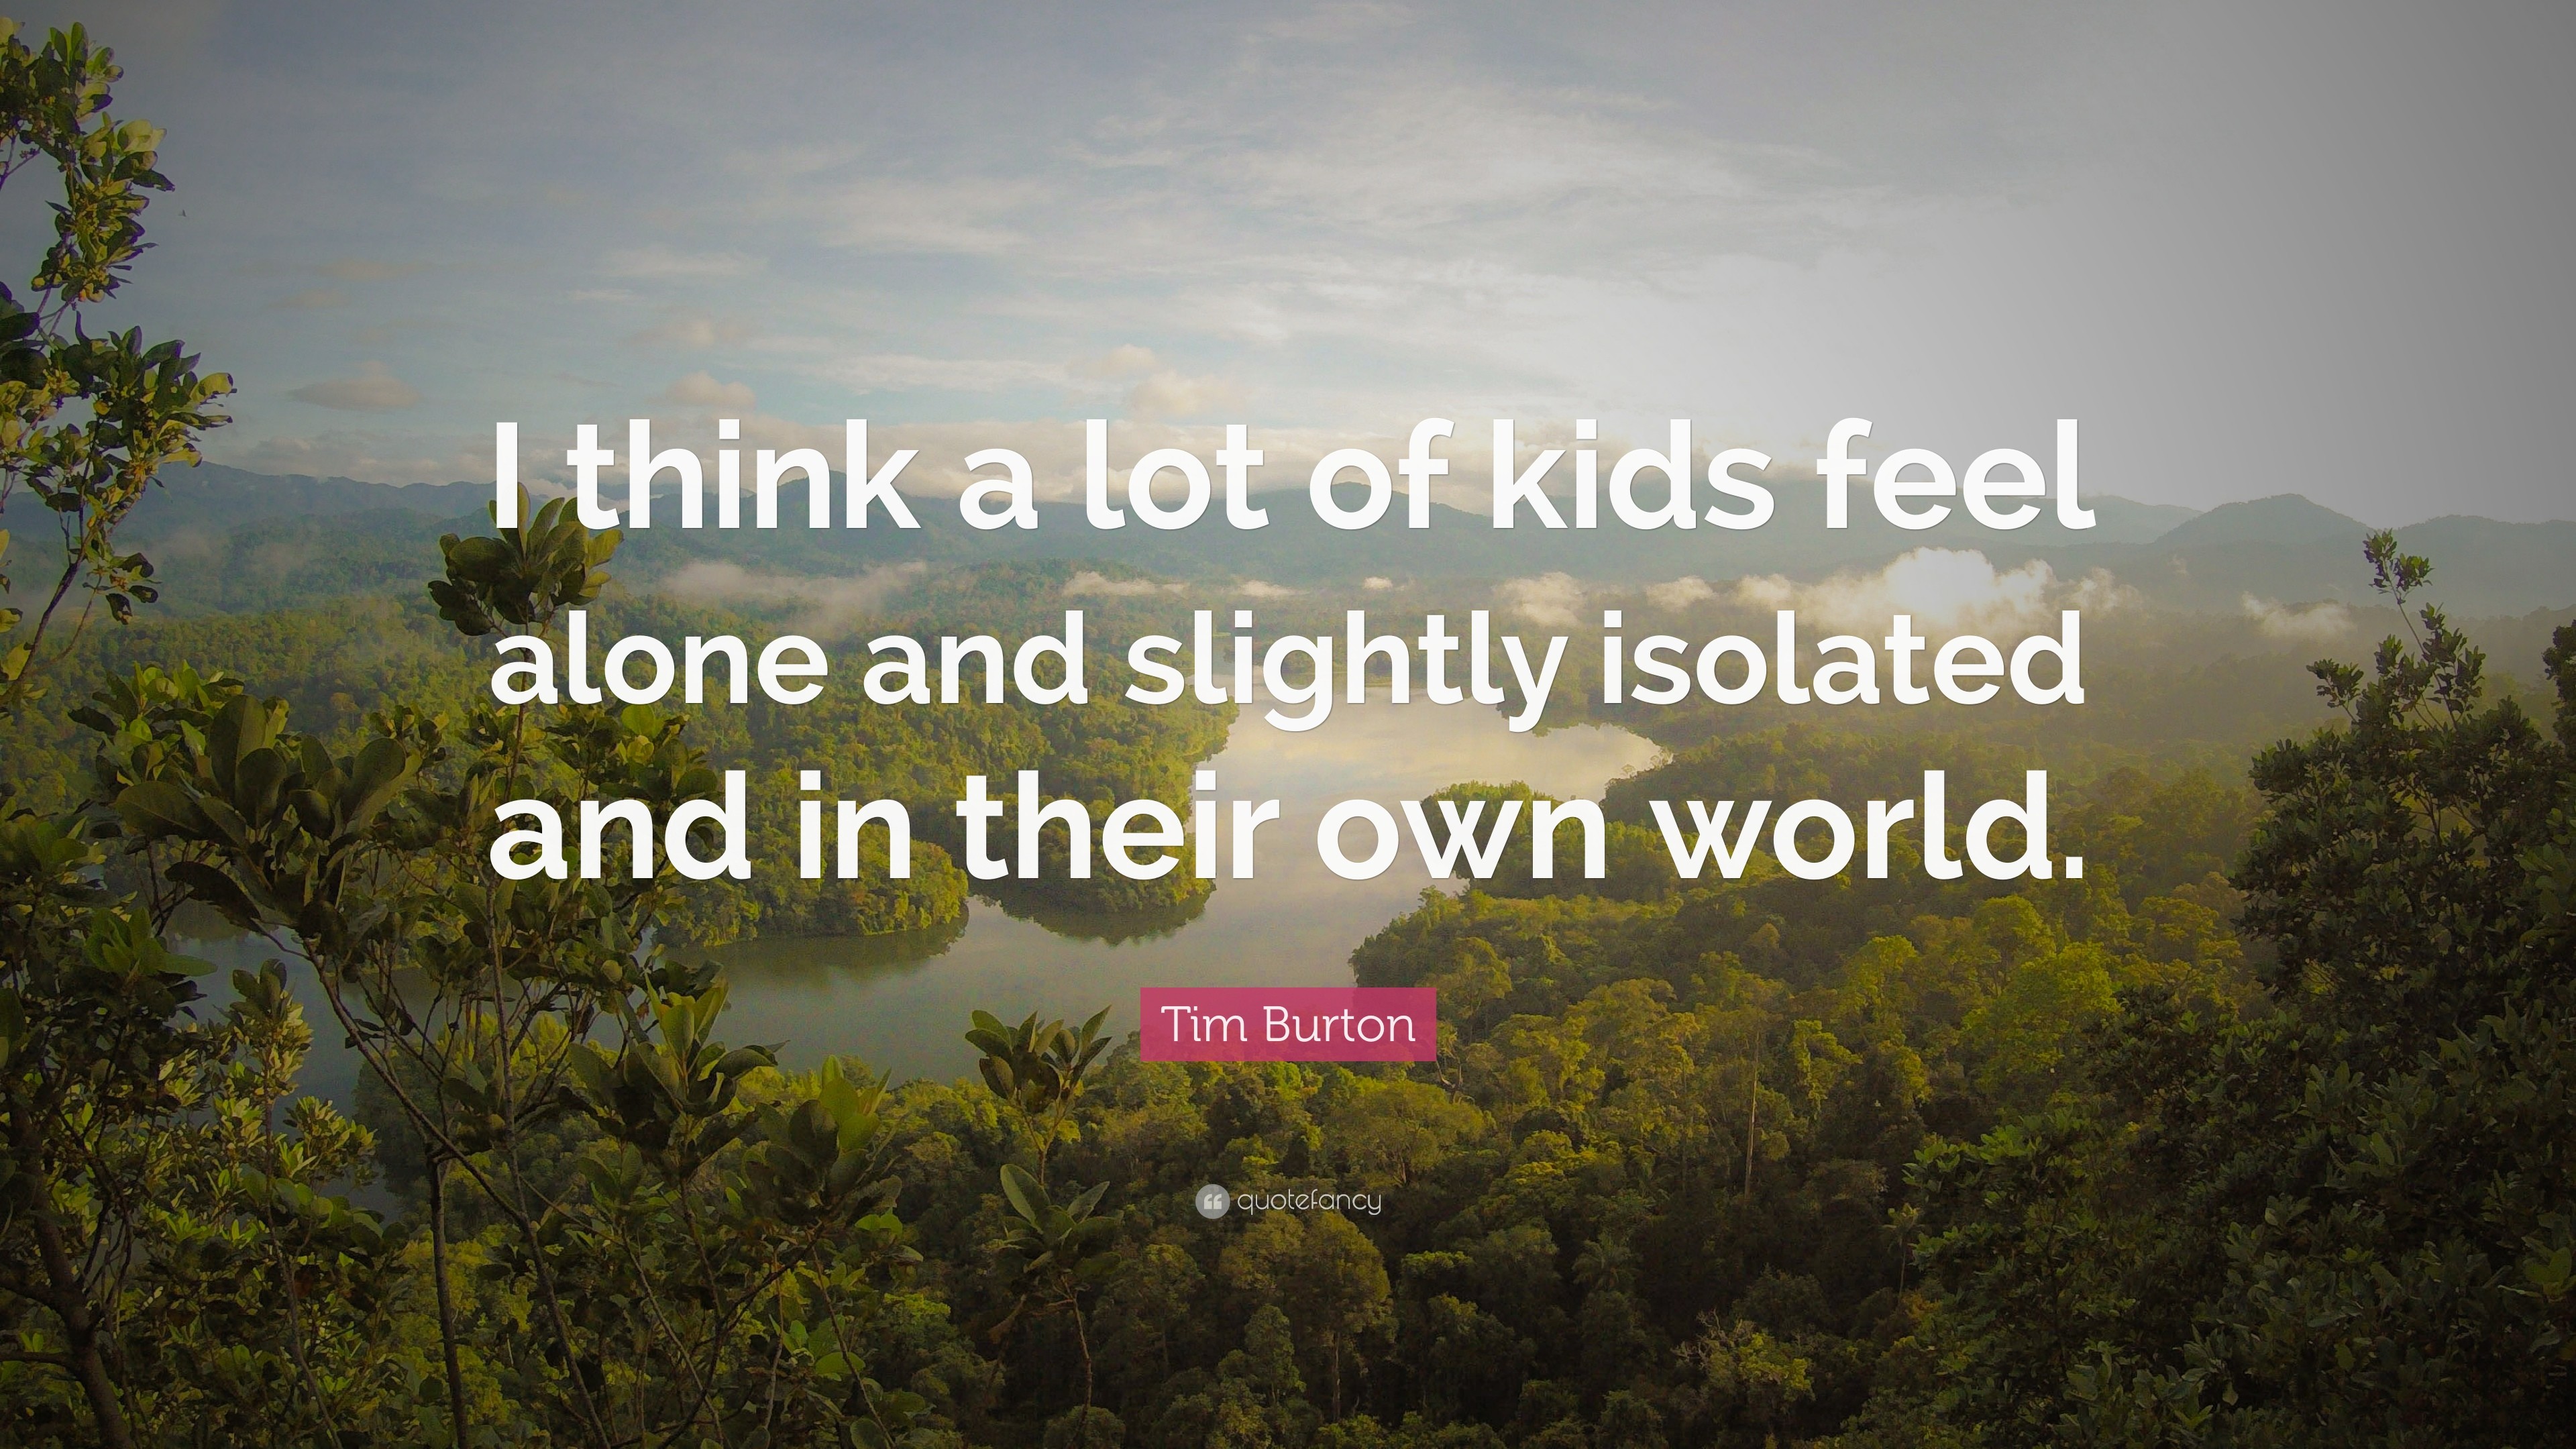 3840x2160 Tim Burton Quote: “I think a lot of kids feel alone and slightly isolated